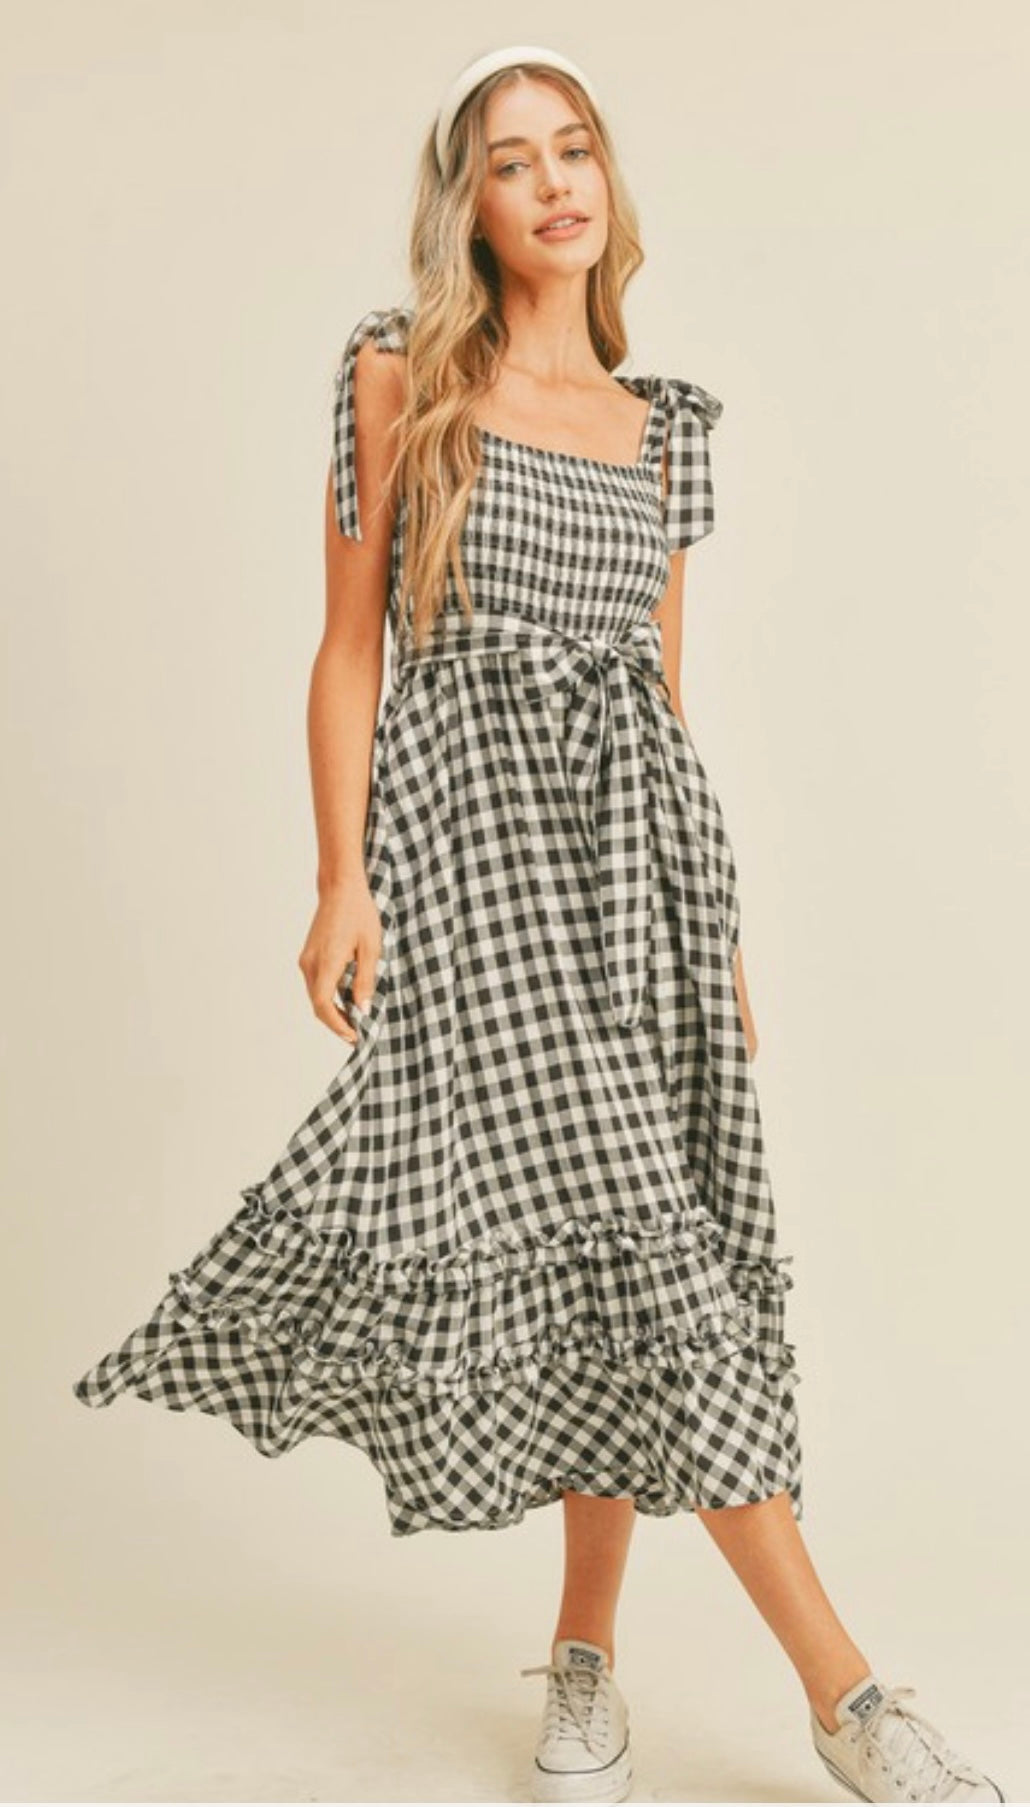 Check Her Out Gingham Dress